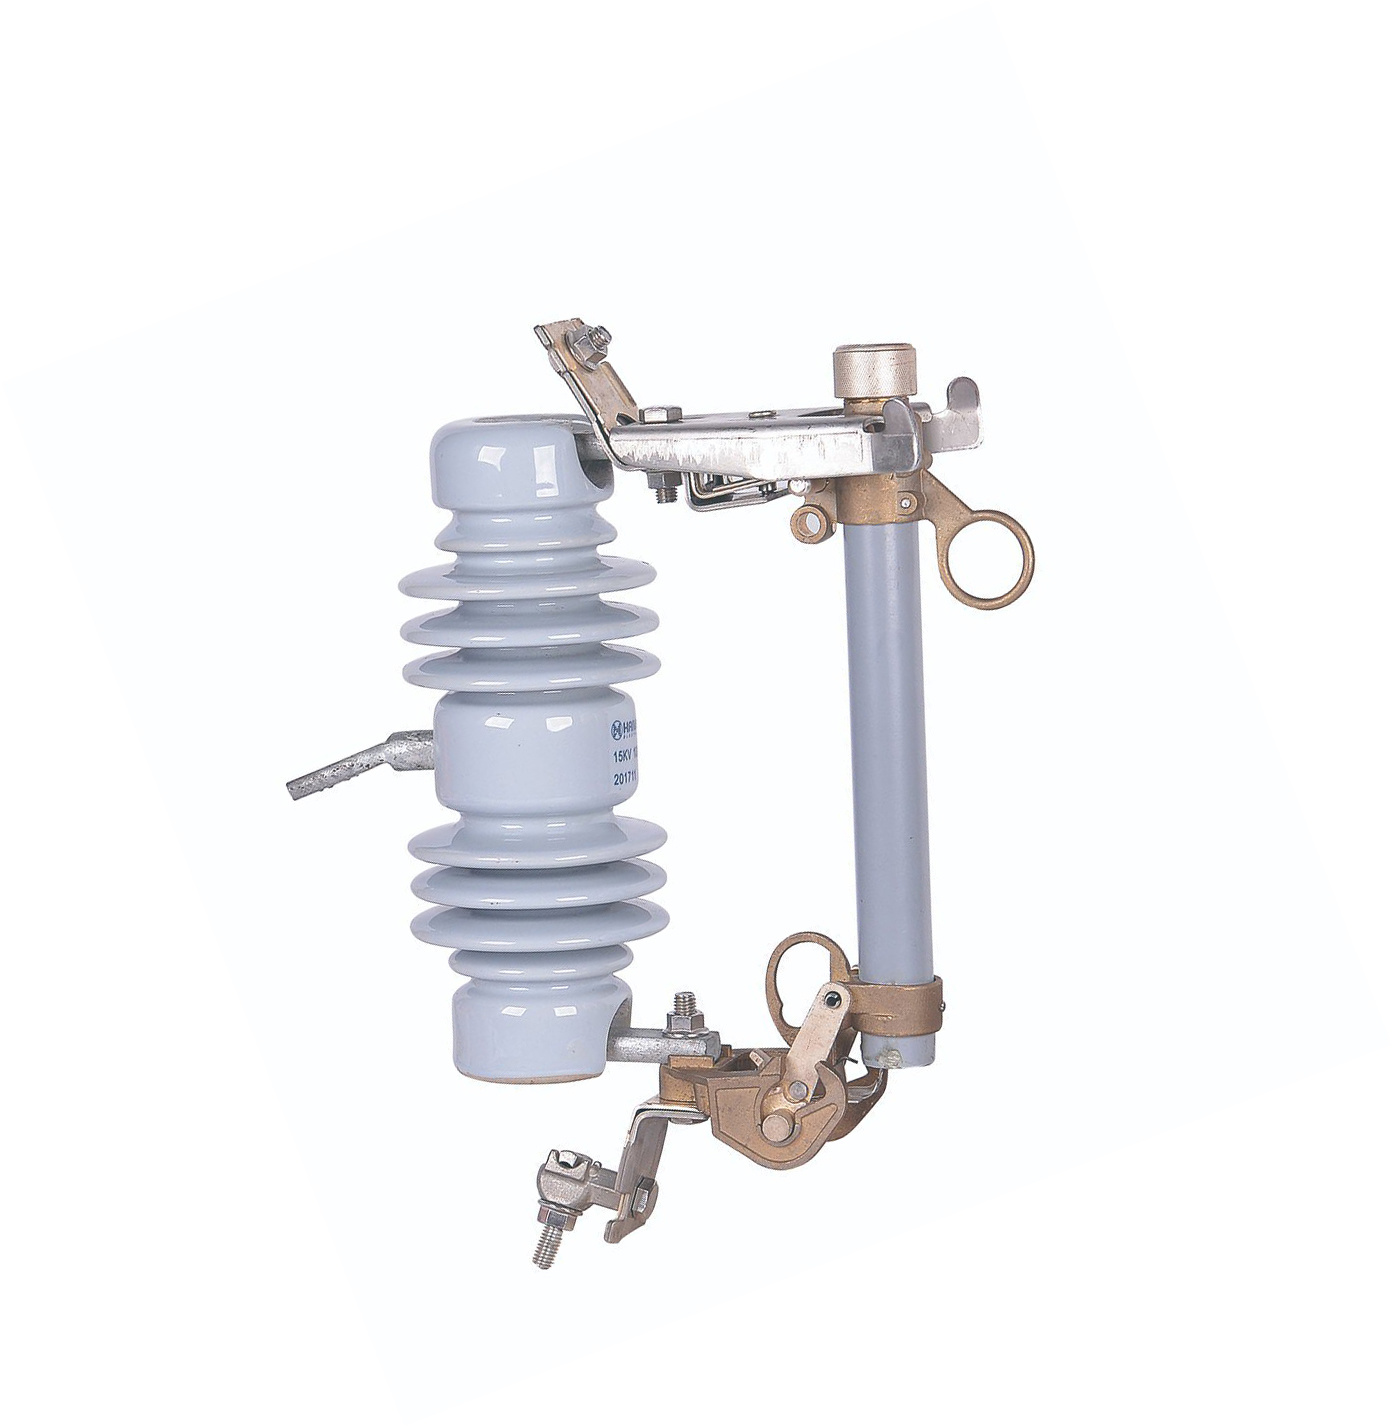 Outdoor 24kv Ceramic Expulsion Drop-out Fuse Cutout with Arc Chamber